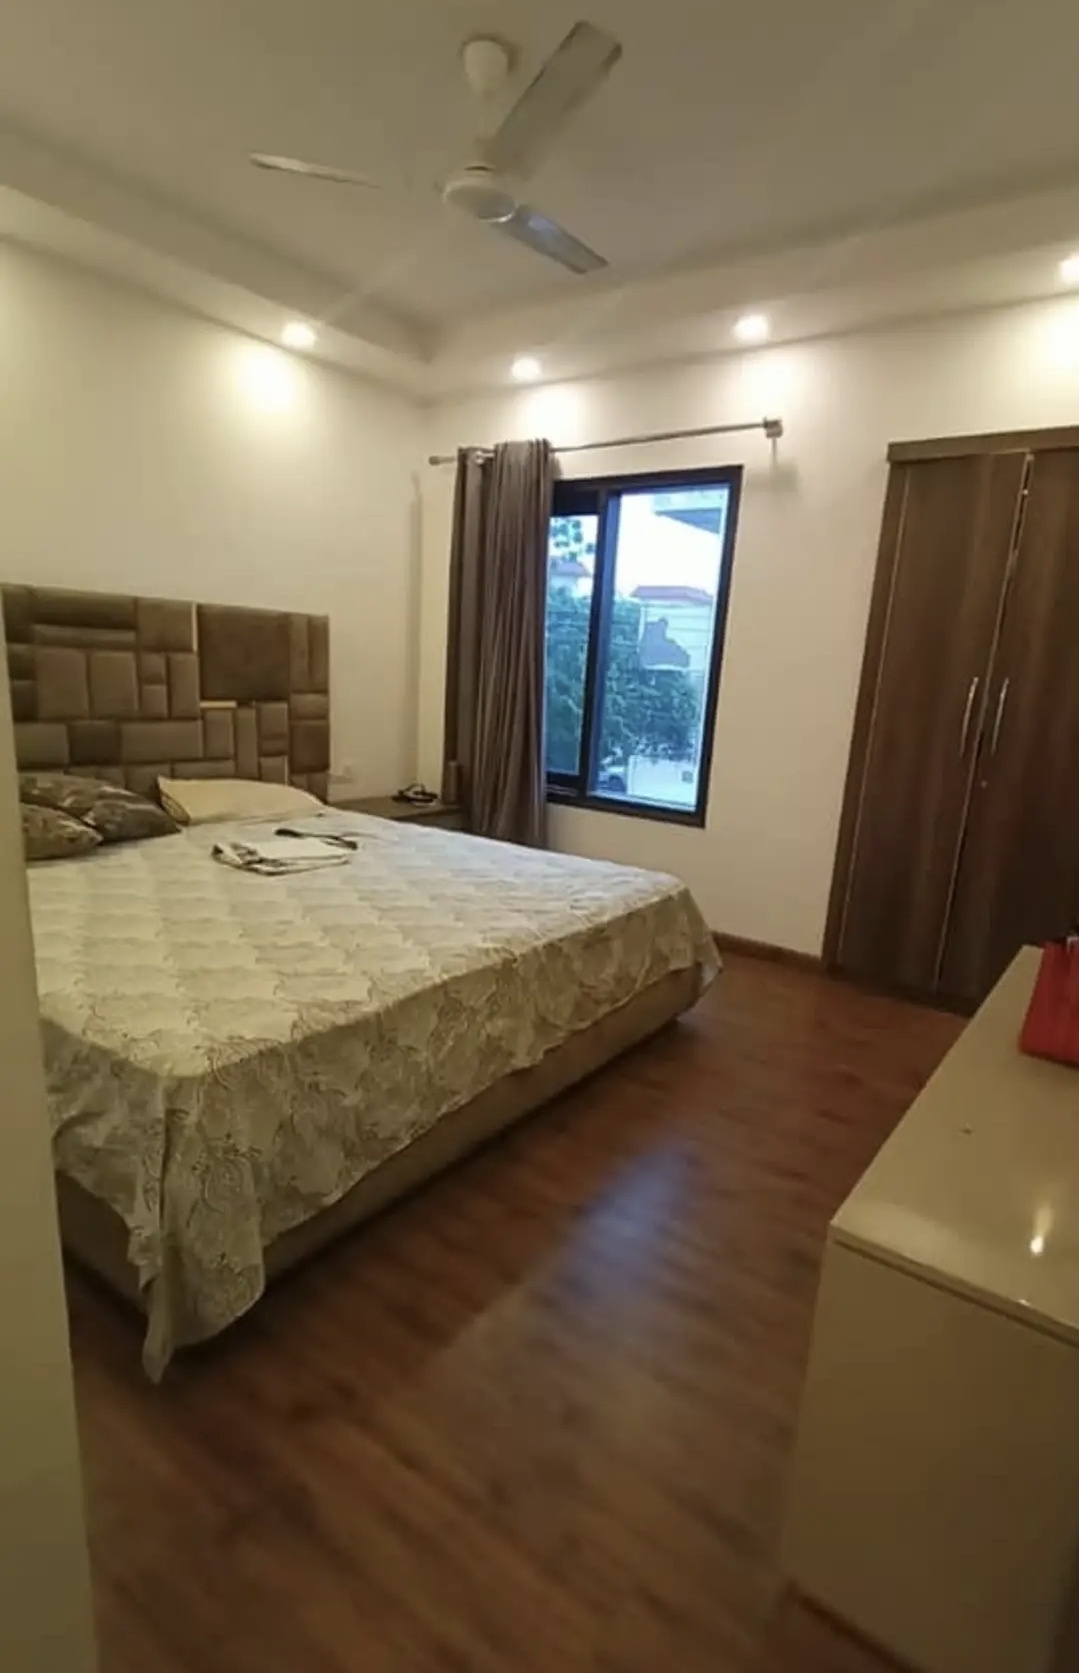 3 Bed/ 3 Bath Apartment/ Flat, Furnished for rent @Sushantloc 1 - C block sector 43